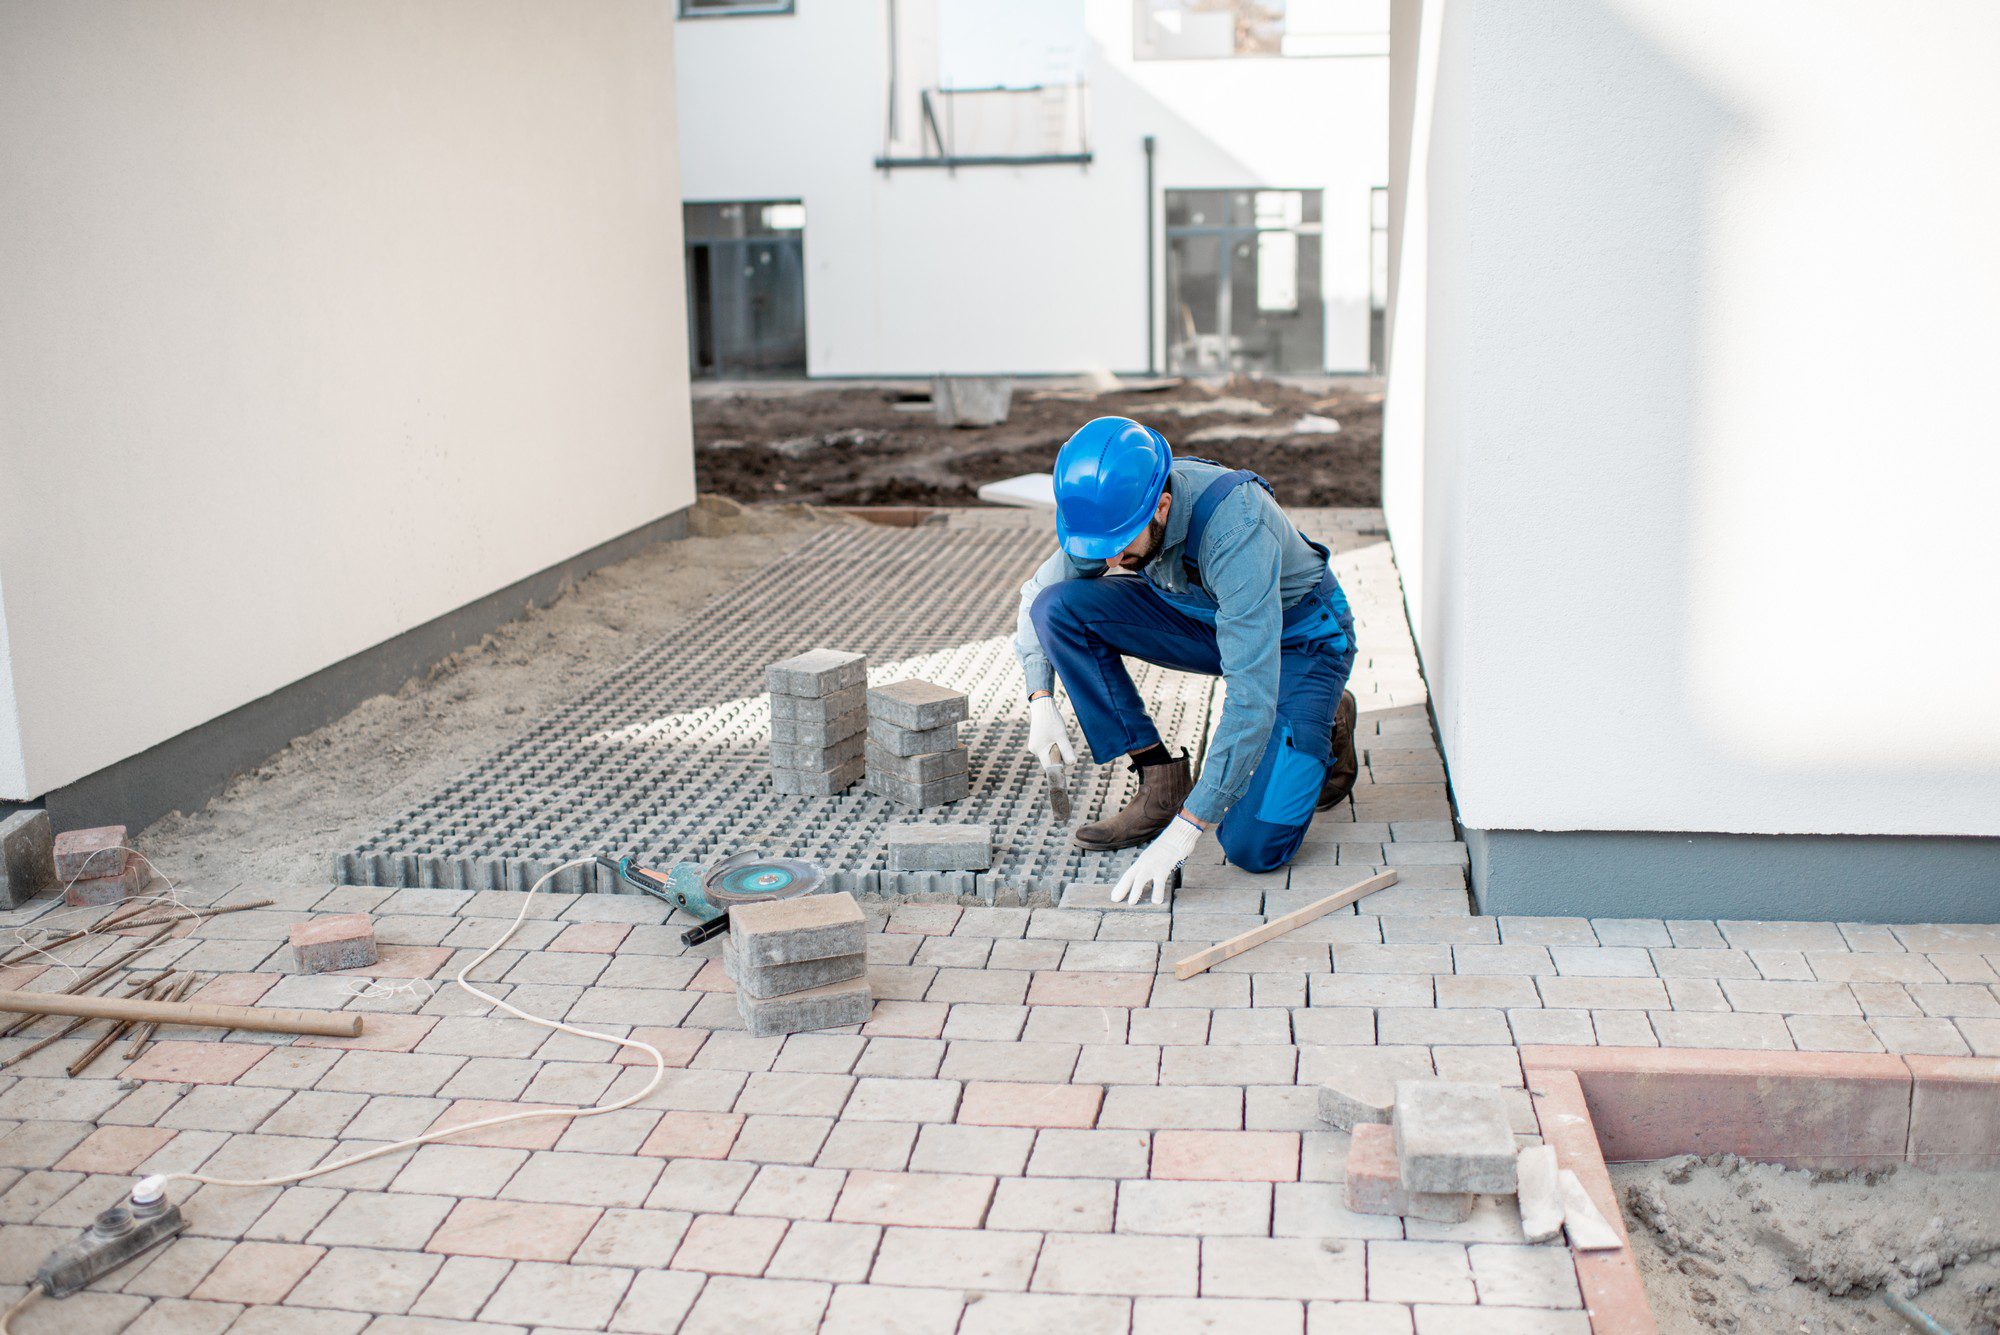 The image shows a construction scene where a worker wearing a blue hard hat and blue coveralls is installing paving stones or bricks to create a walkway or patio area. They are kneeling on the partially completed pavement, actively laying down the bricks. The ground preparation includes a layer of gravel, and there is a pattern to the brick placement, indicating a particular design for the walkway. Some tools and materials are scattered around the site, including what appears to be a level or straightedge, additional paving stones, and possibly a cutting tool for shaping bricks. The background suggests this is part of a larger construction area or building complex, as there is construction debris and unfinished landscaping visible. The worker is focused on their task, demonstrating manual labour typically involved in such construction projects.